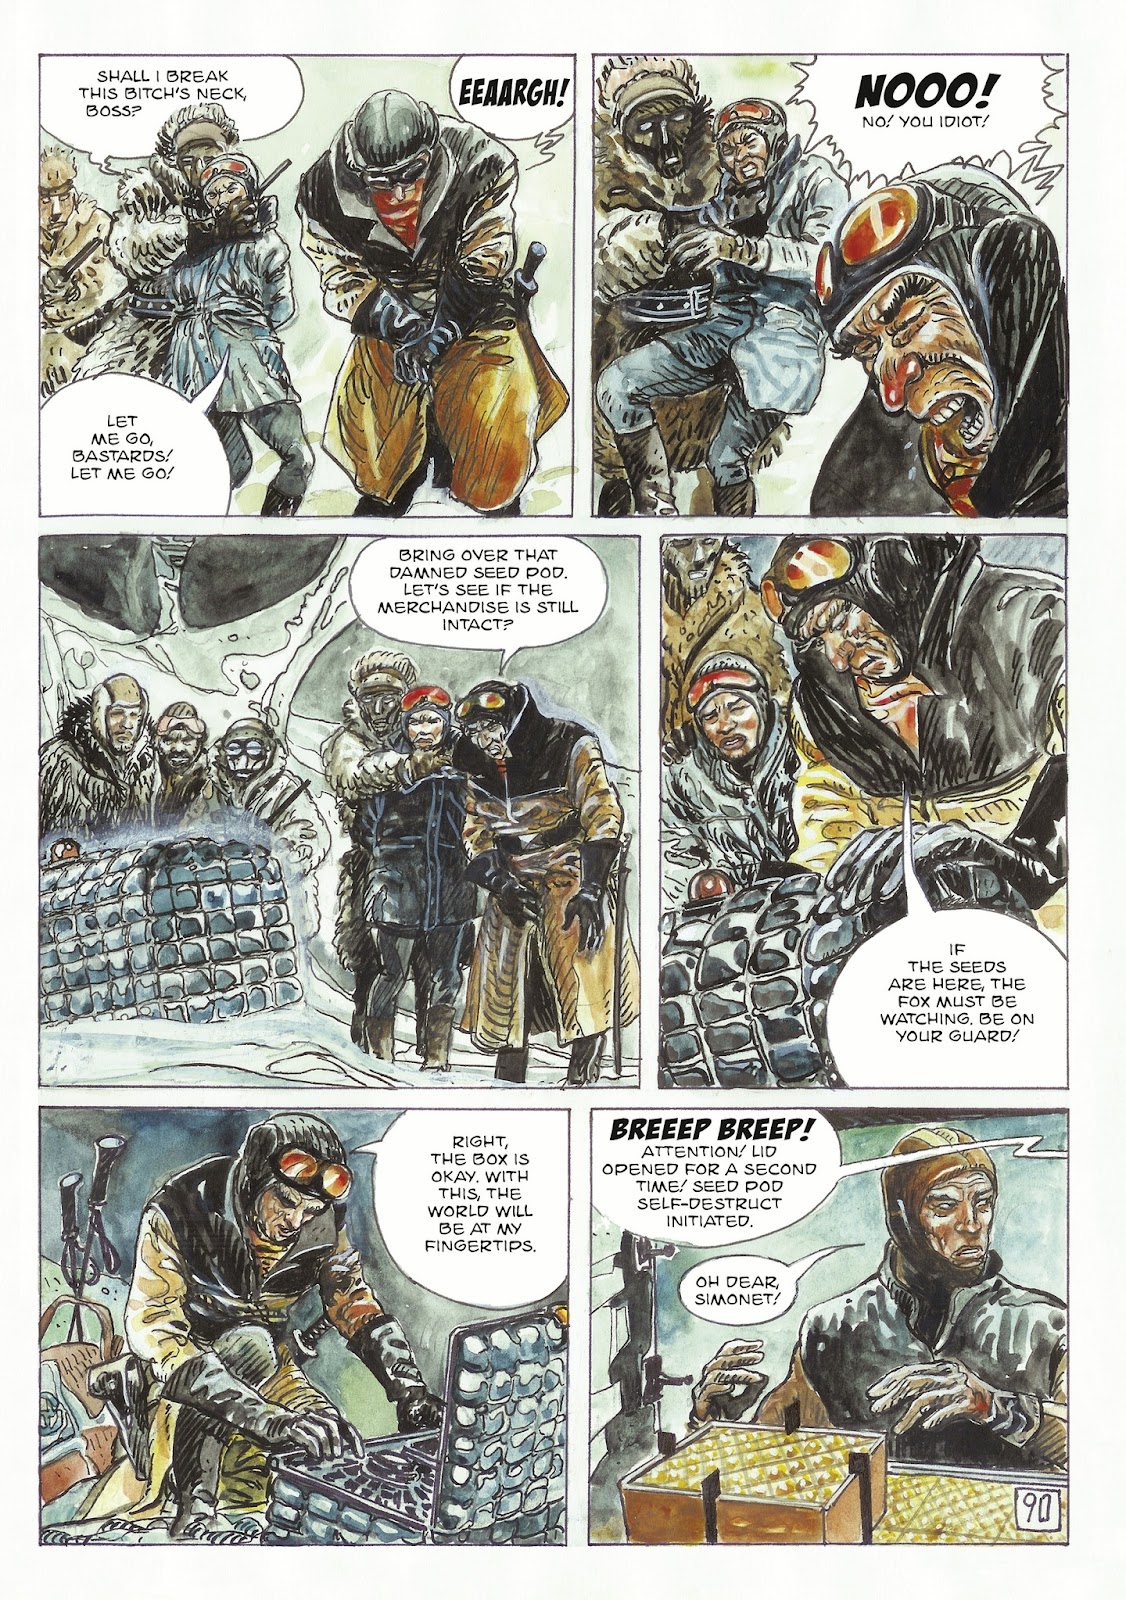 The Man With the Bear issue 2 - Page 36